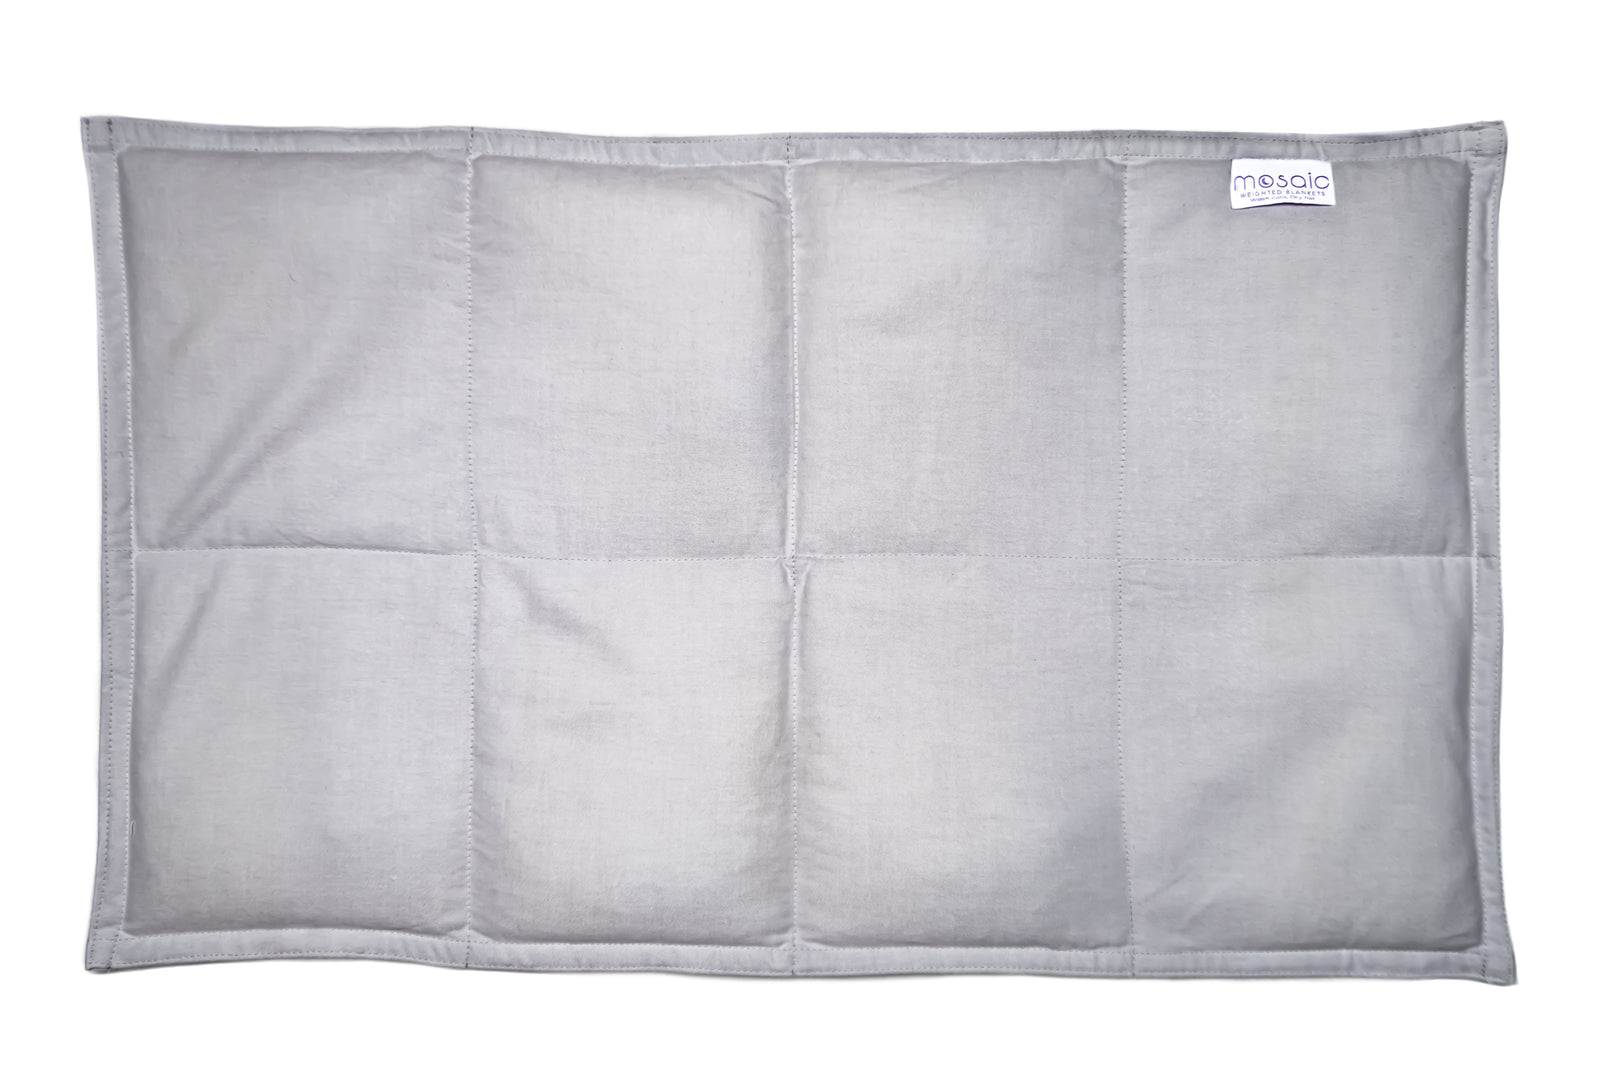 Mosaic Weighted Blankets accessories Coolmax Weighted Lap Pad